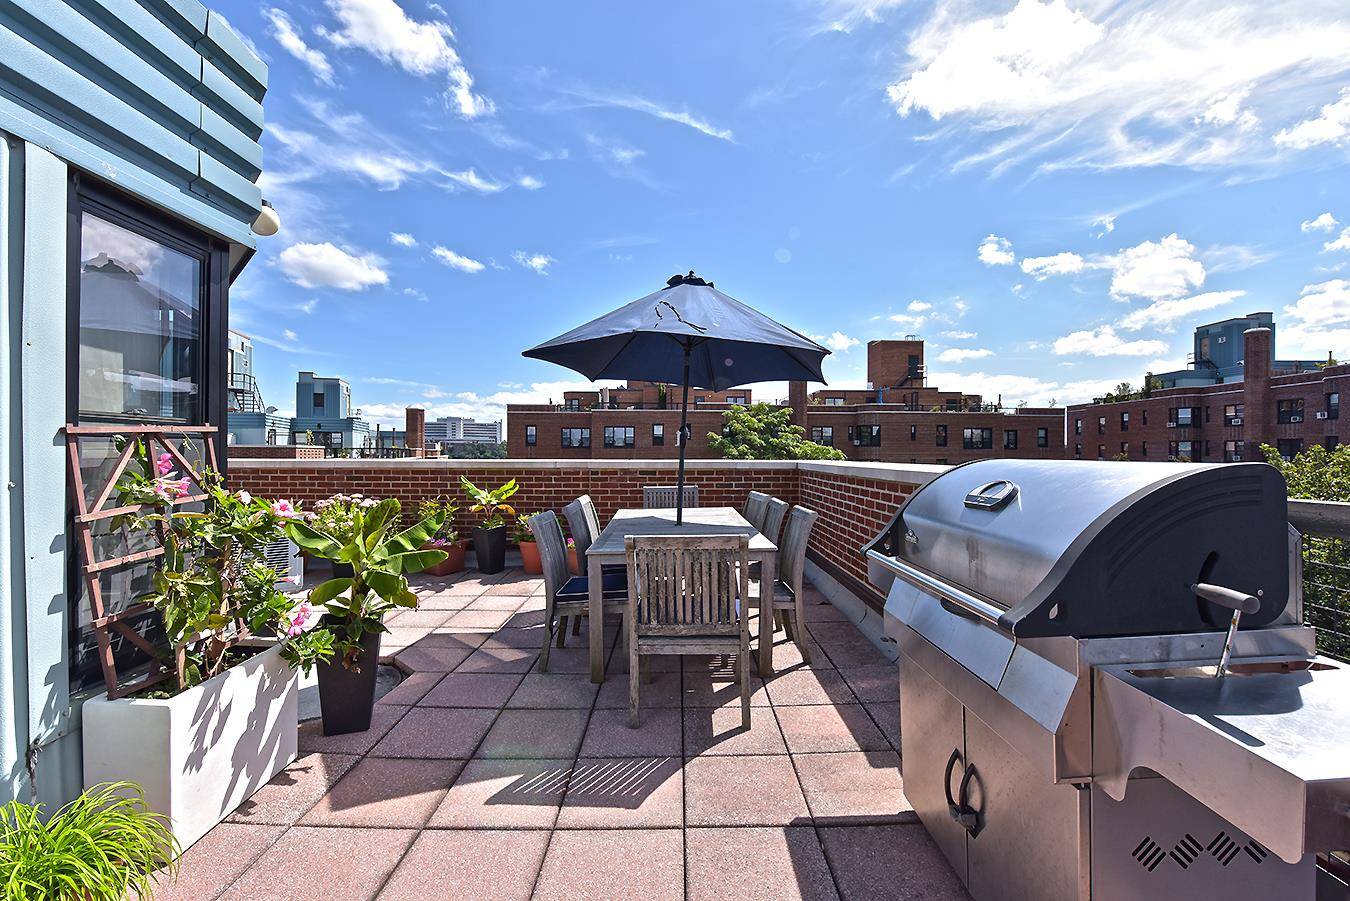 Stunning 3 Bedroom Inwood Duplex with Private TerraceImagine a relaxing weekend spent unwinding on a spacious private terrace attached to your very own Manhattan penthouse apartment.